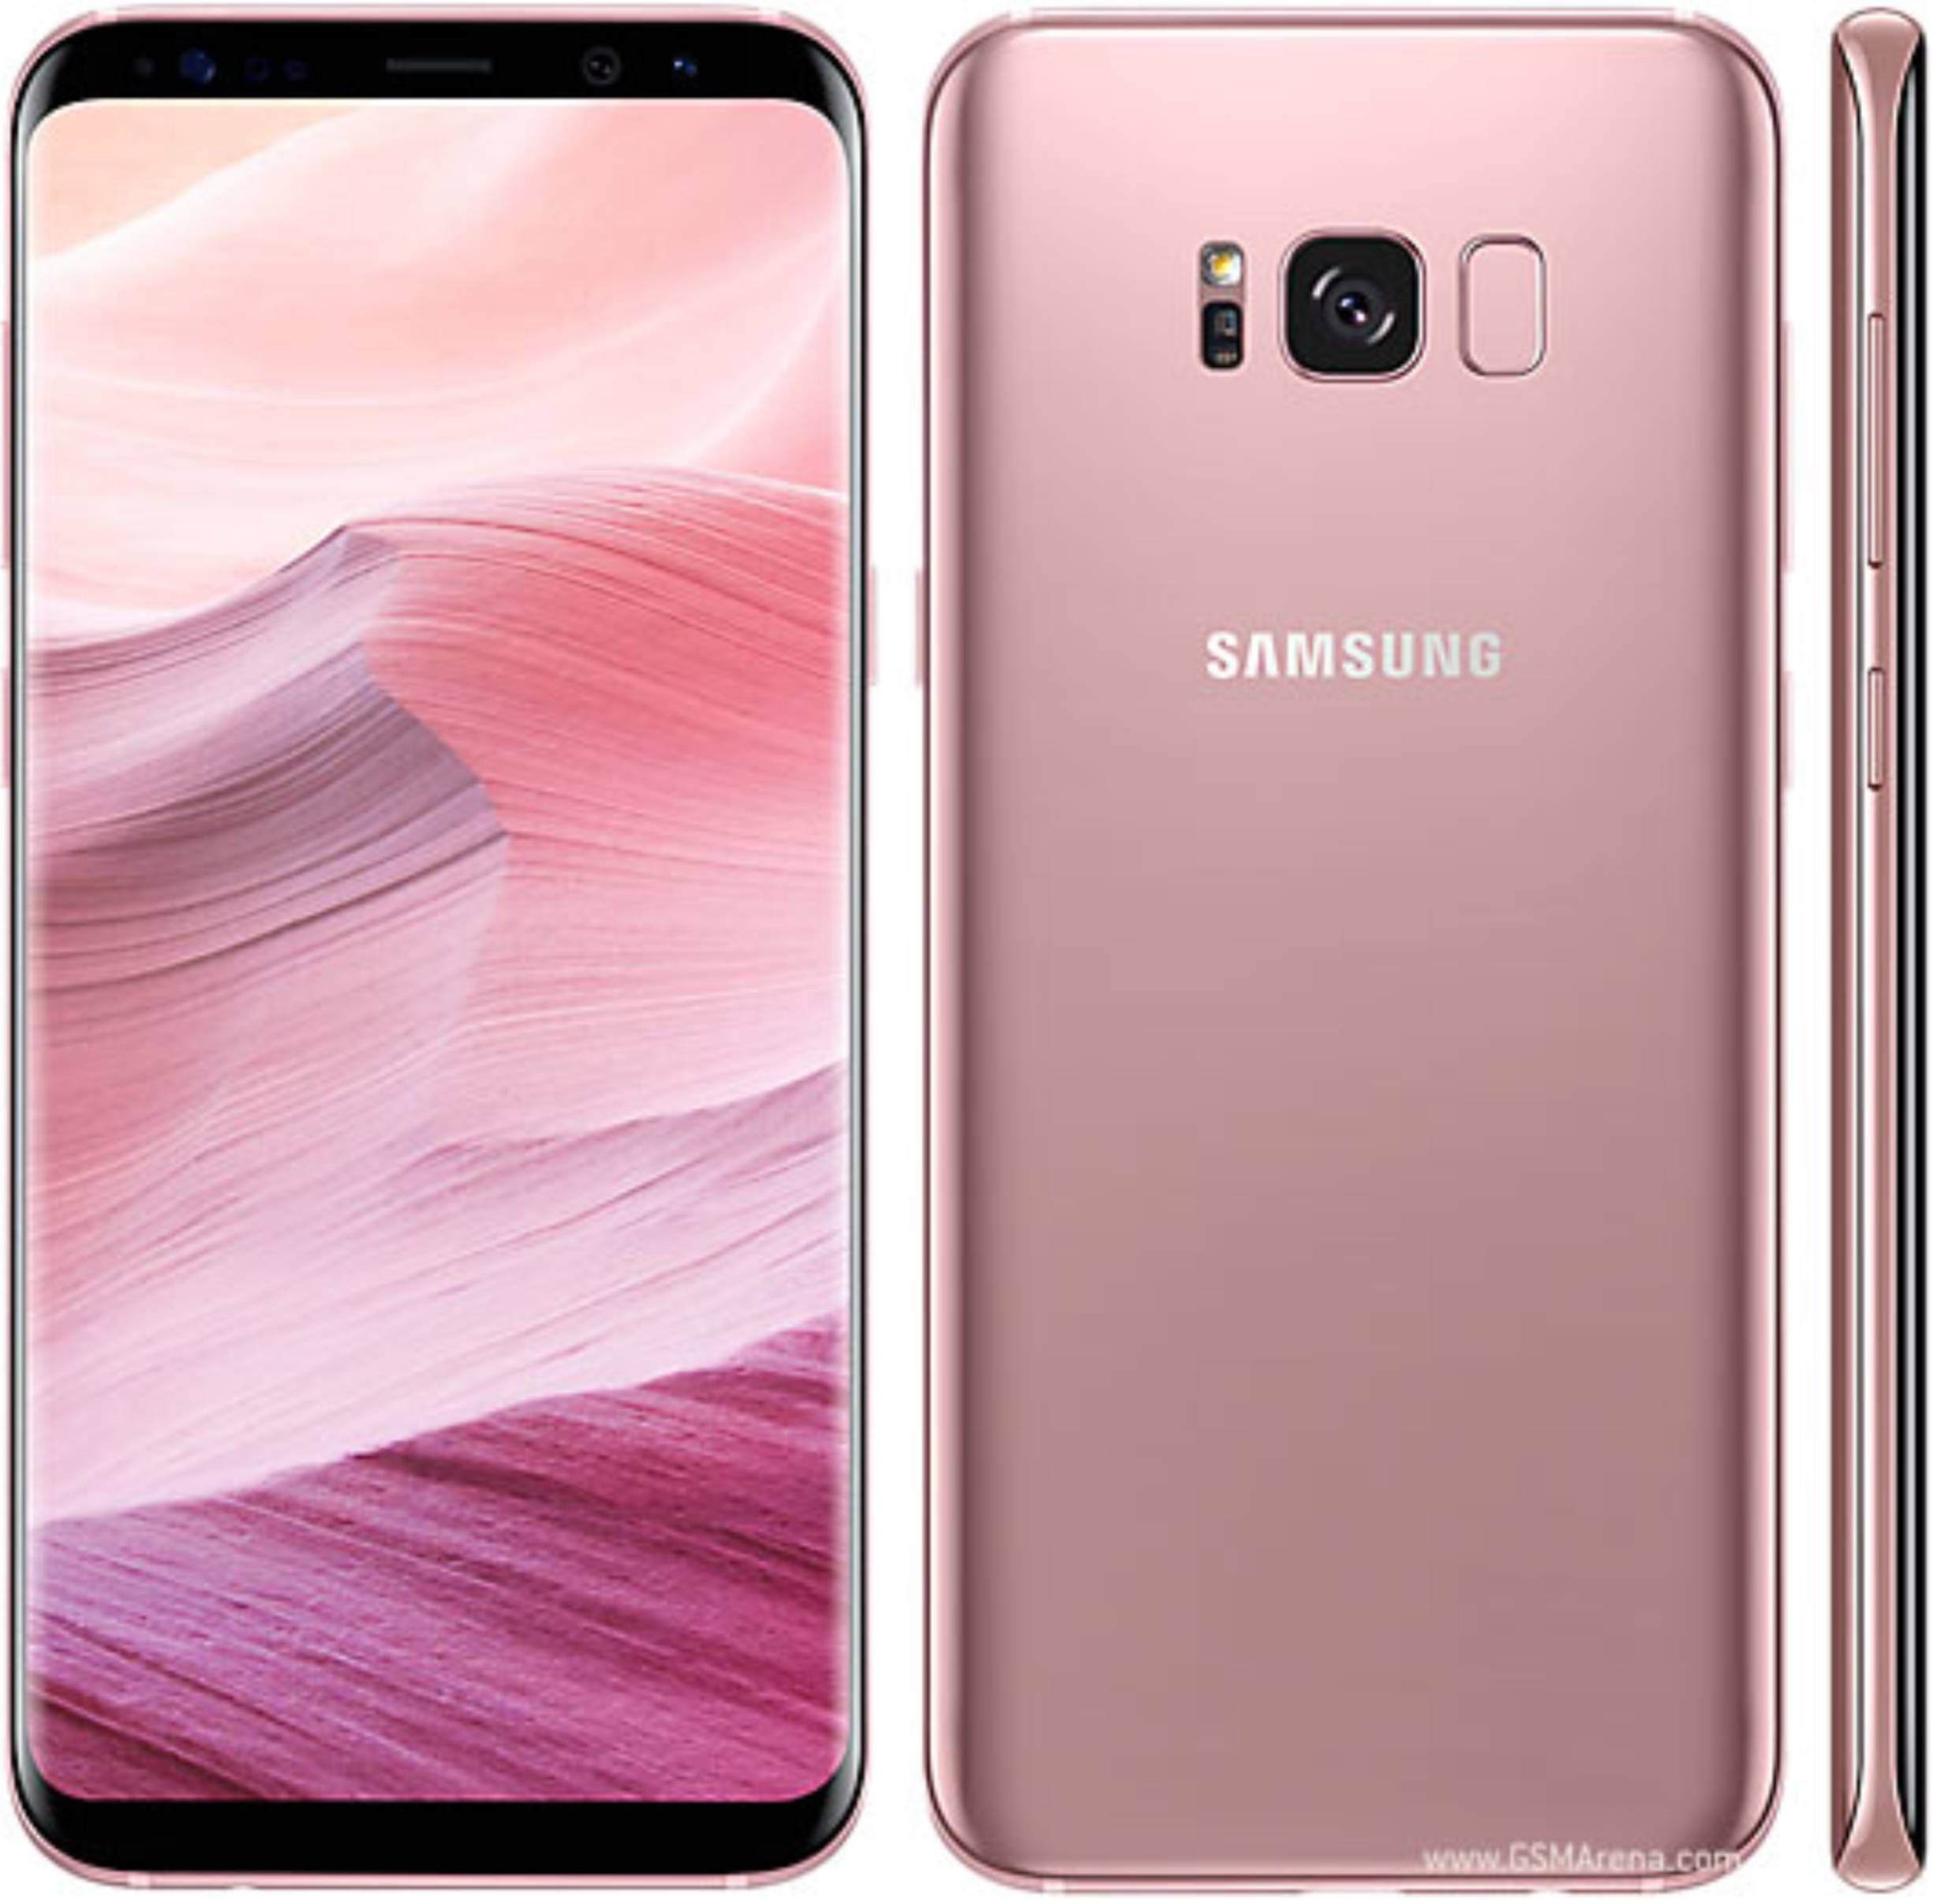 What is Samsung Galaxy S8+ Screen Replacement Cost in Nairobi?